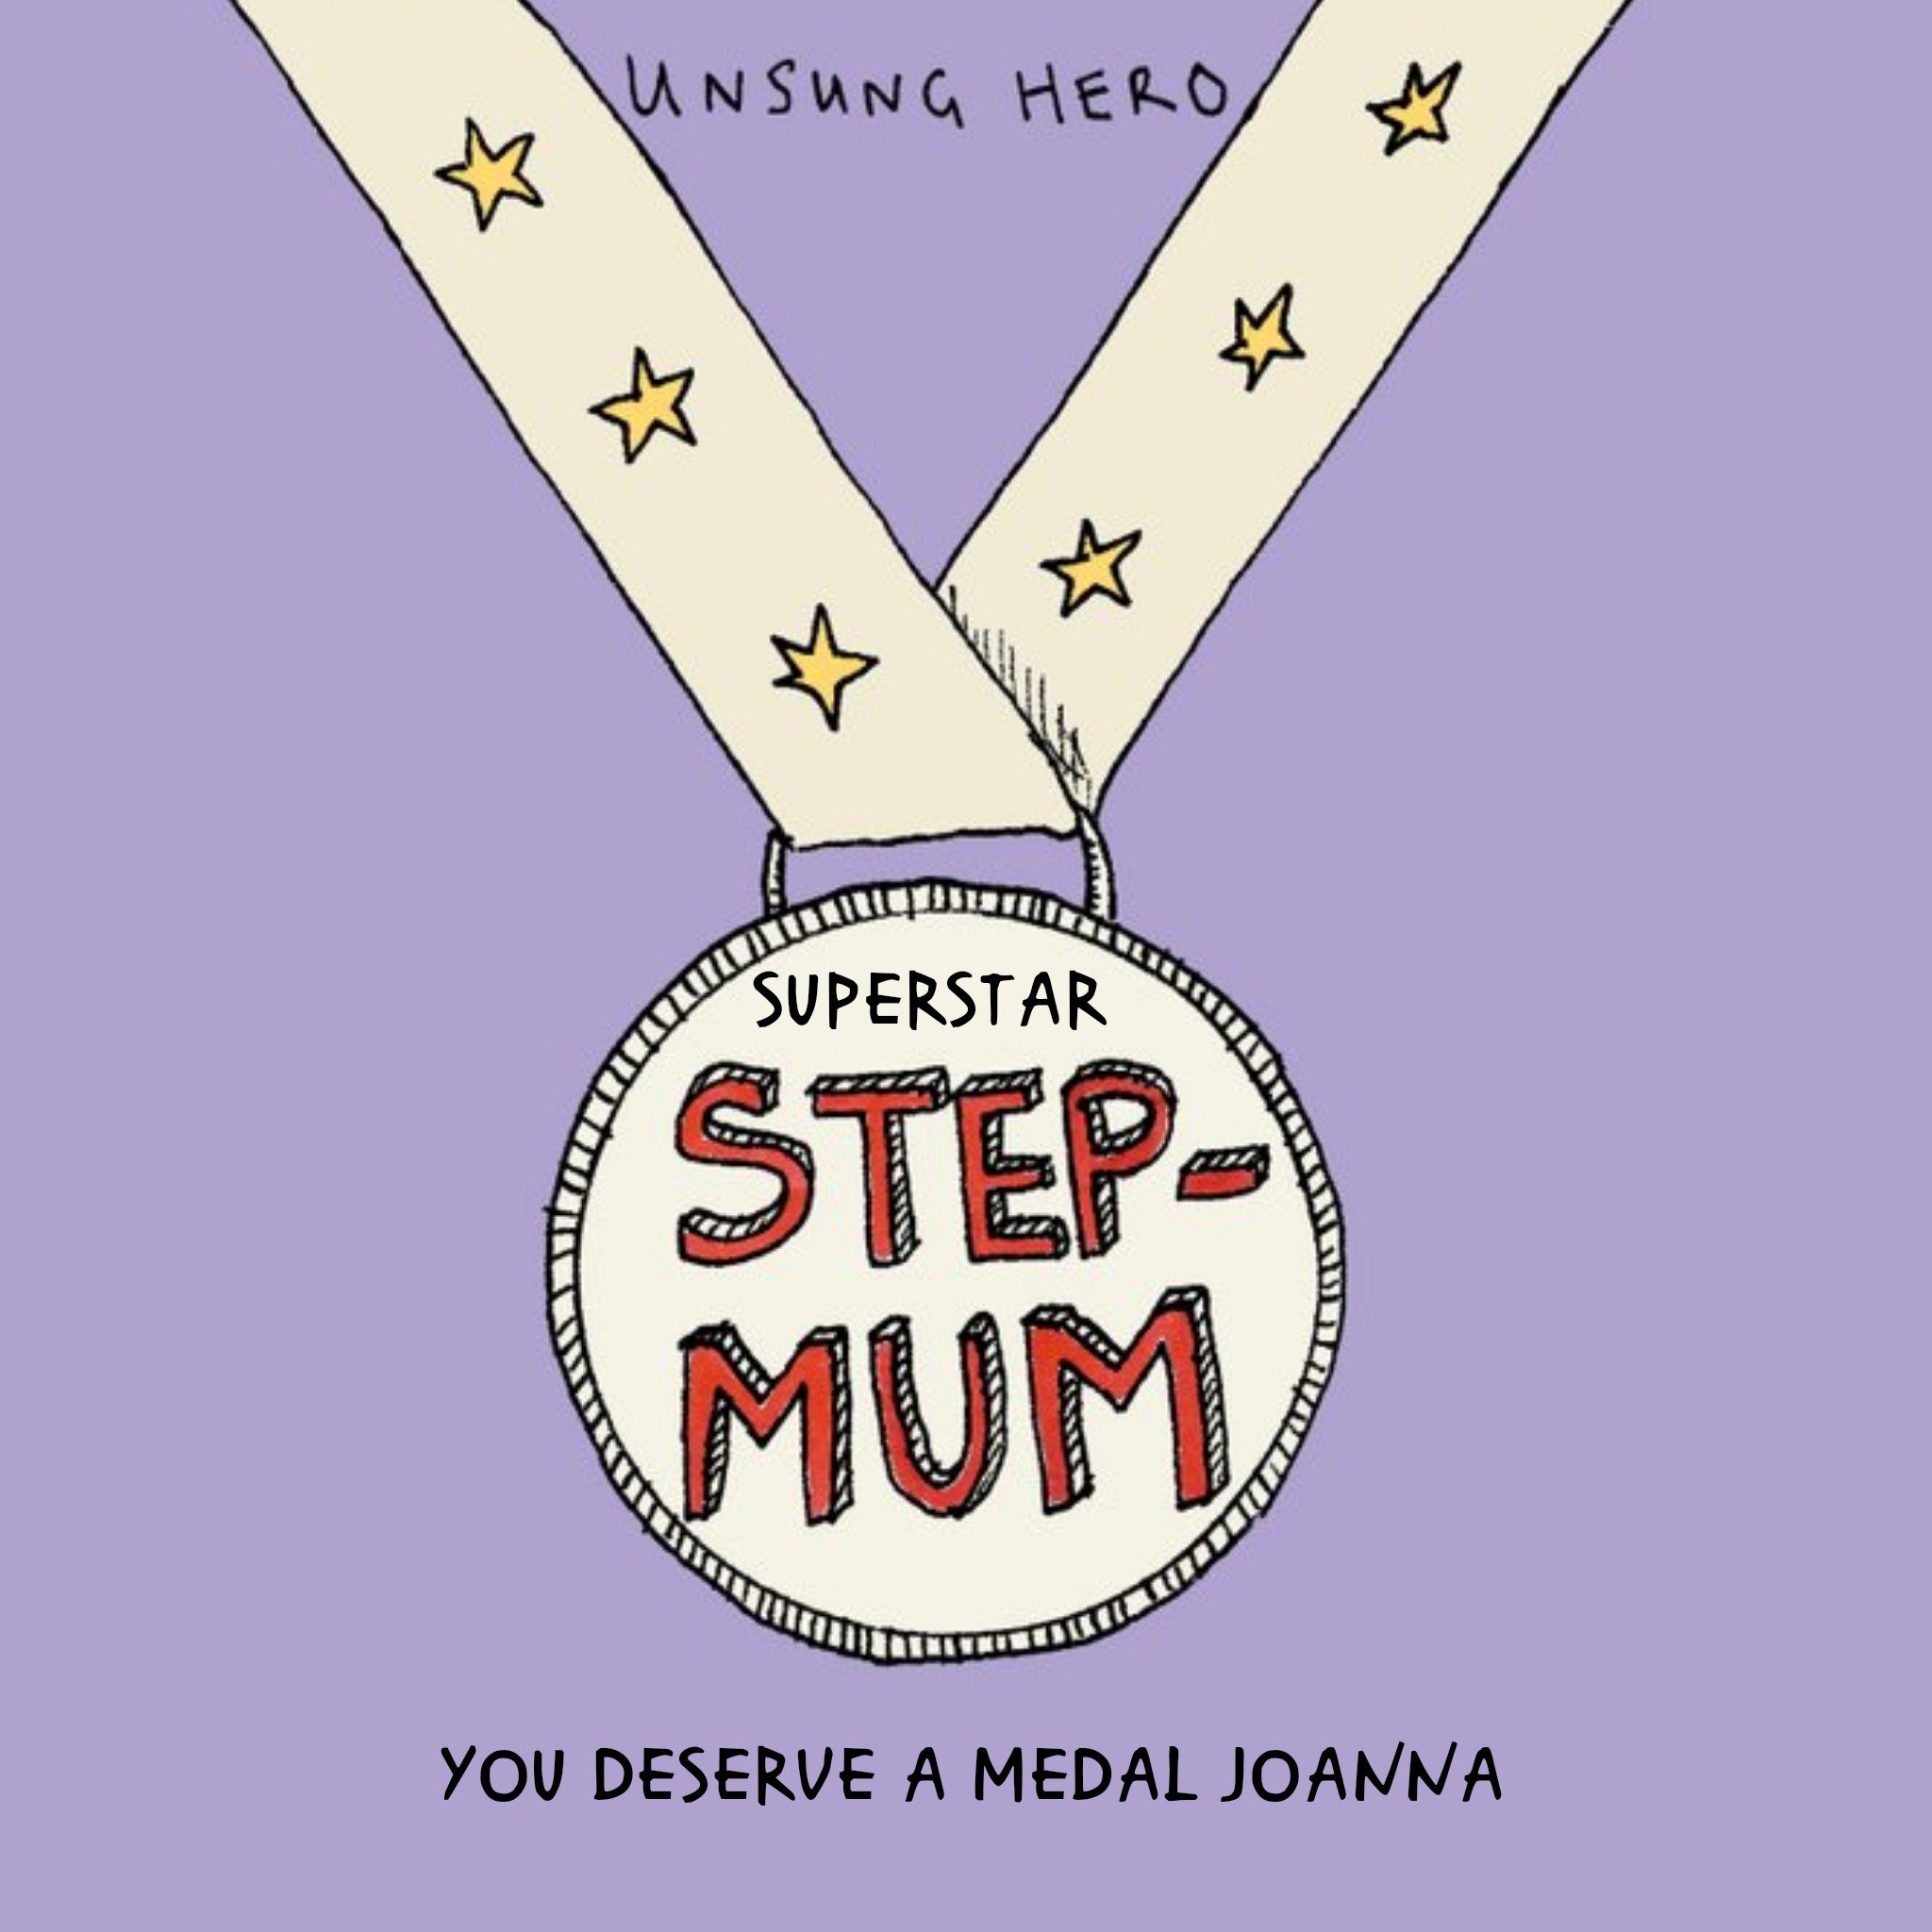 Moonpig Mother's Day Card - Step Mum - Unsung Hero, Large